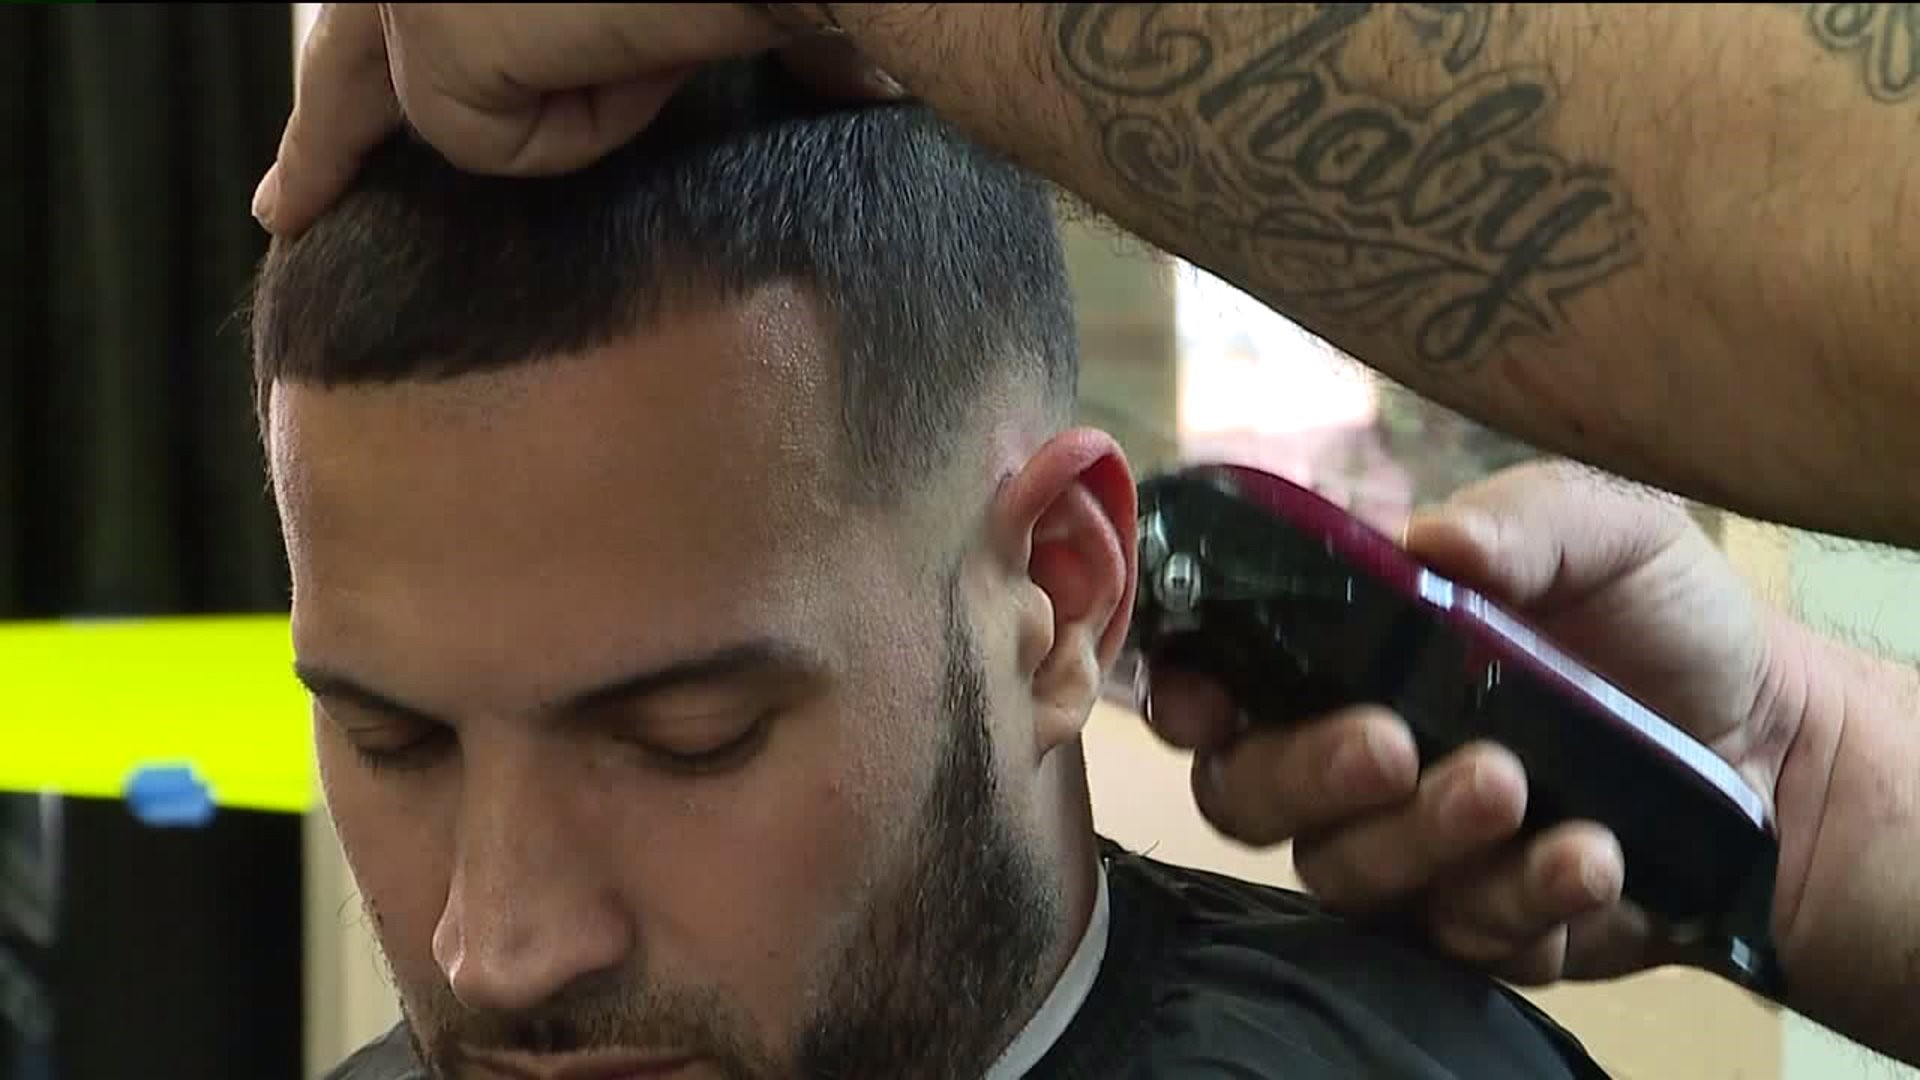 'A lot of potential' - New Barbershop Opens in Pottsville